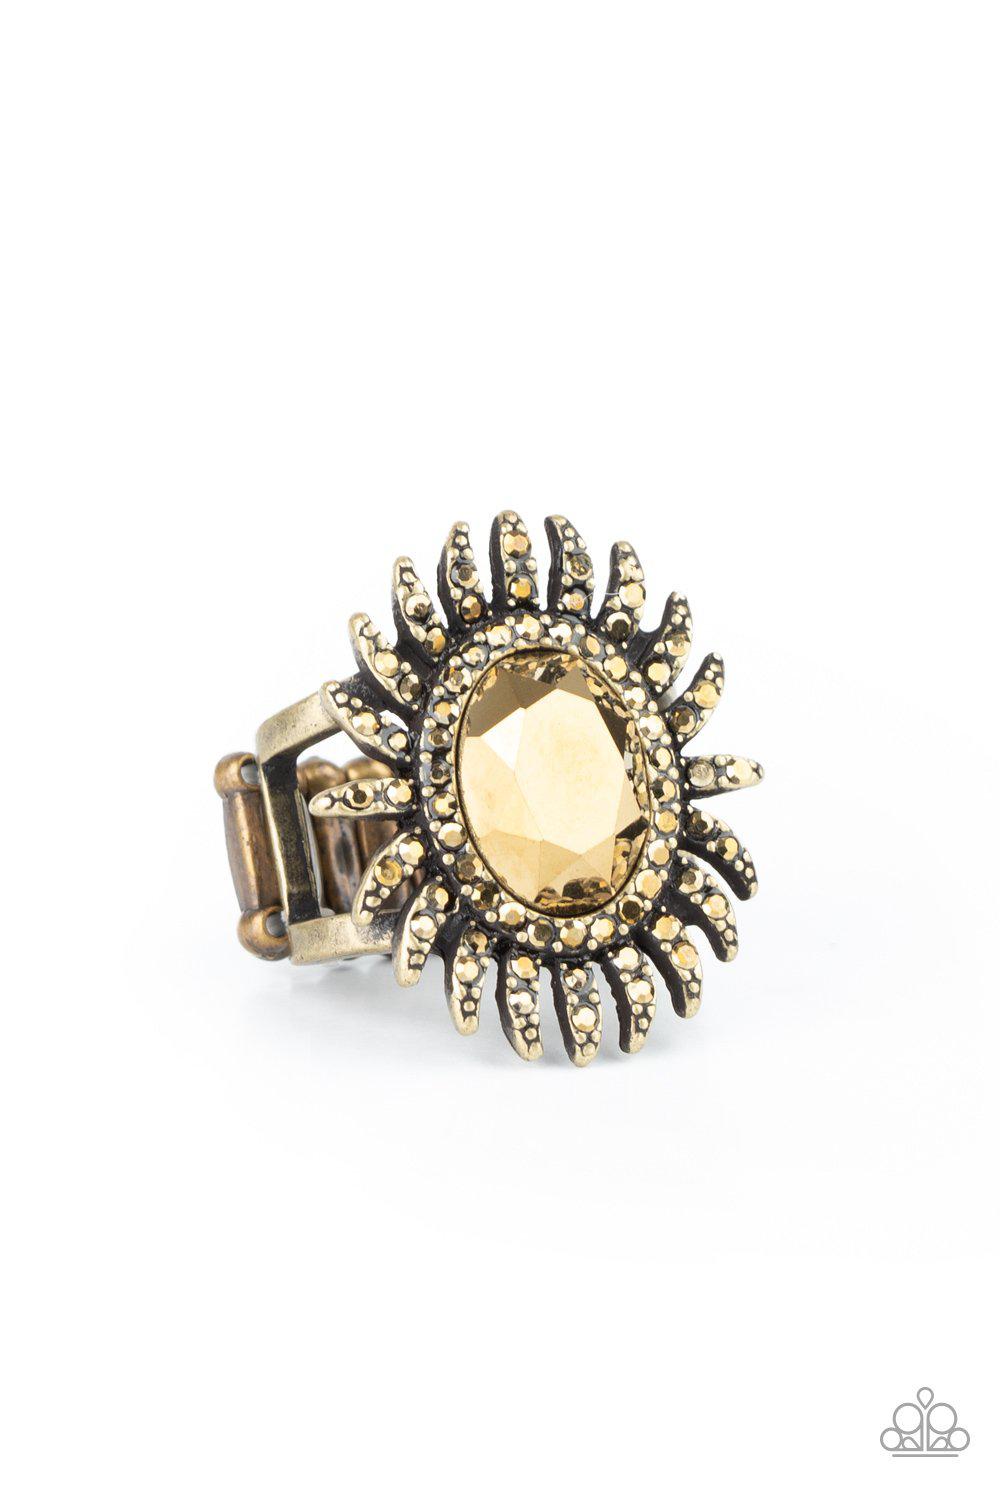 Ultra Luxe Brass Ring - Paparazzi Accessories- lightbox - CarasShop.com - $5 Jewelry by Cara Jewels